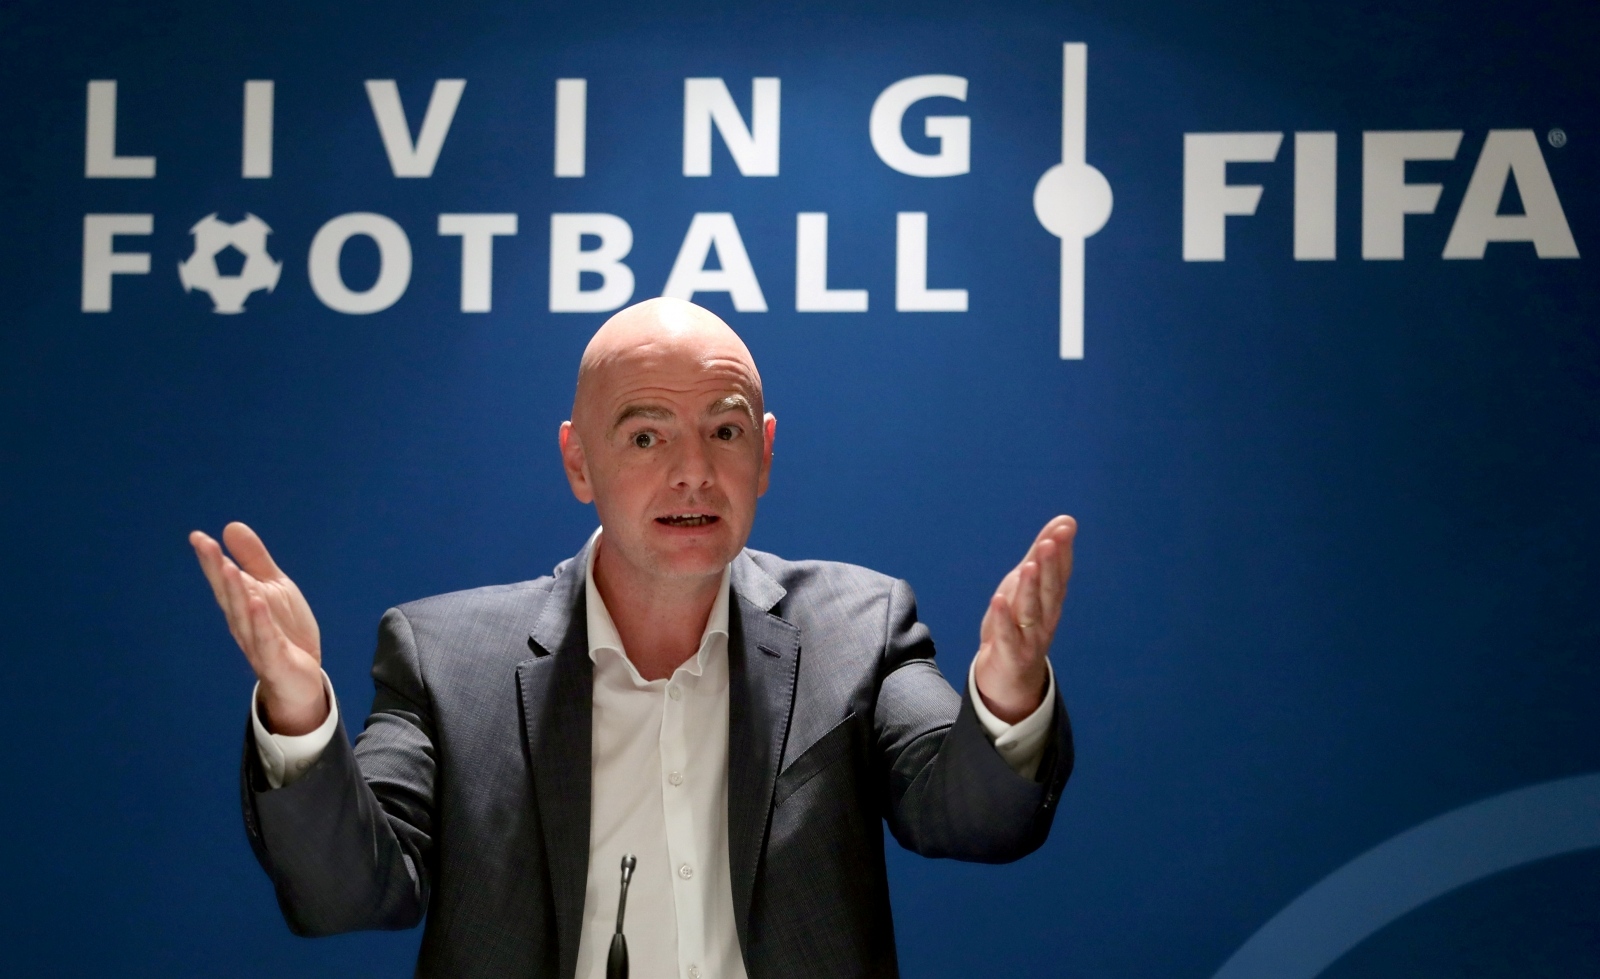 FILE PHOTO: FIFA's President Infantino gestures during a panel discussion in Zurich FILE PHOTO: FIFA's President Gianni Infantino gestures during a panel discussion at the FIFA headquarters in Zurich, Switzerland September 30, 2020. REUTERS/Arnd Wiegmann/File Photo ARND WIEGMANN